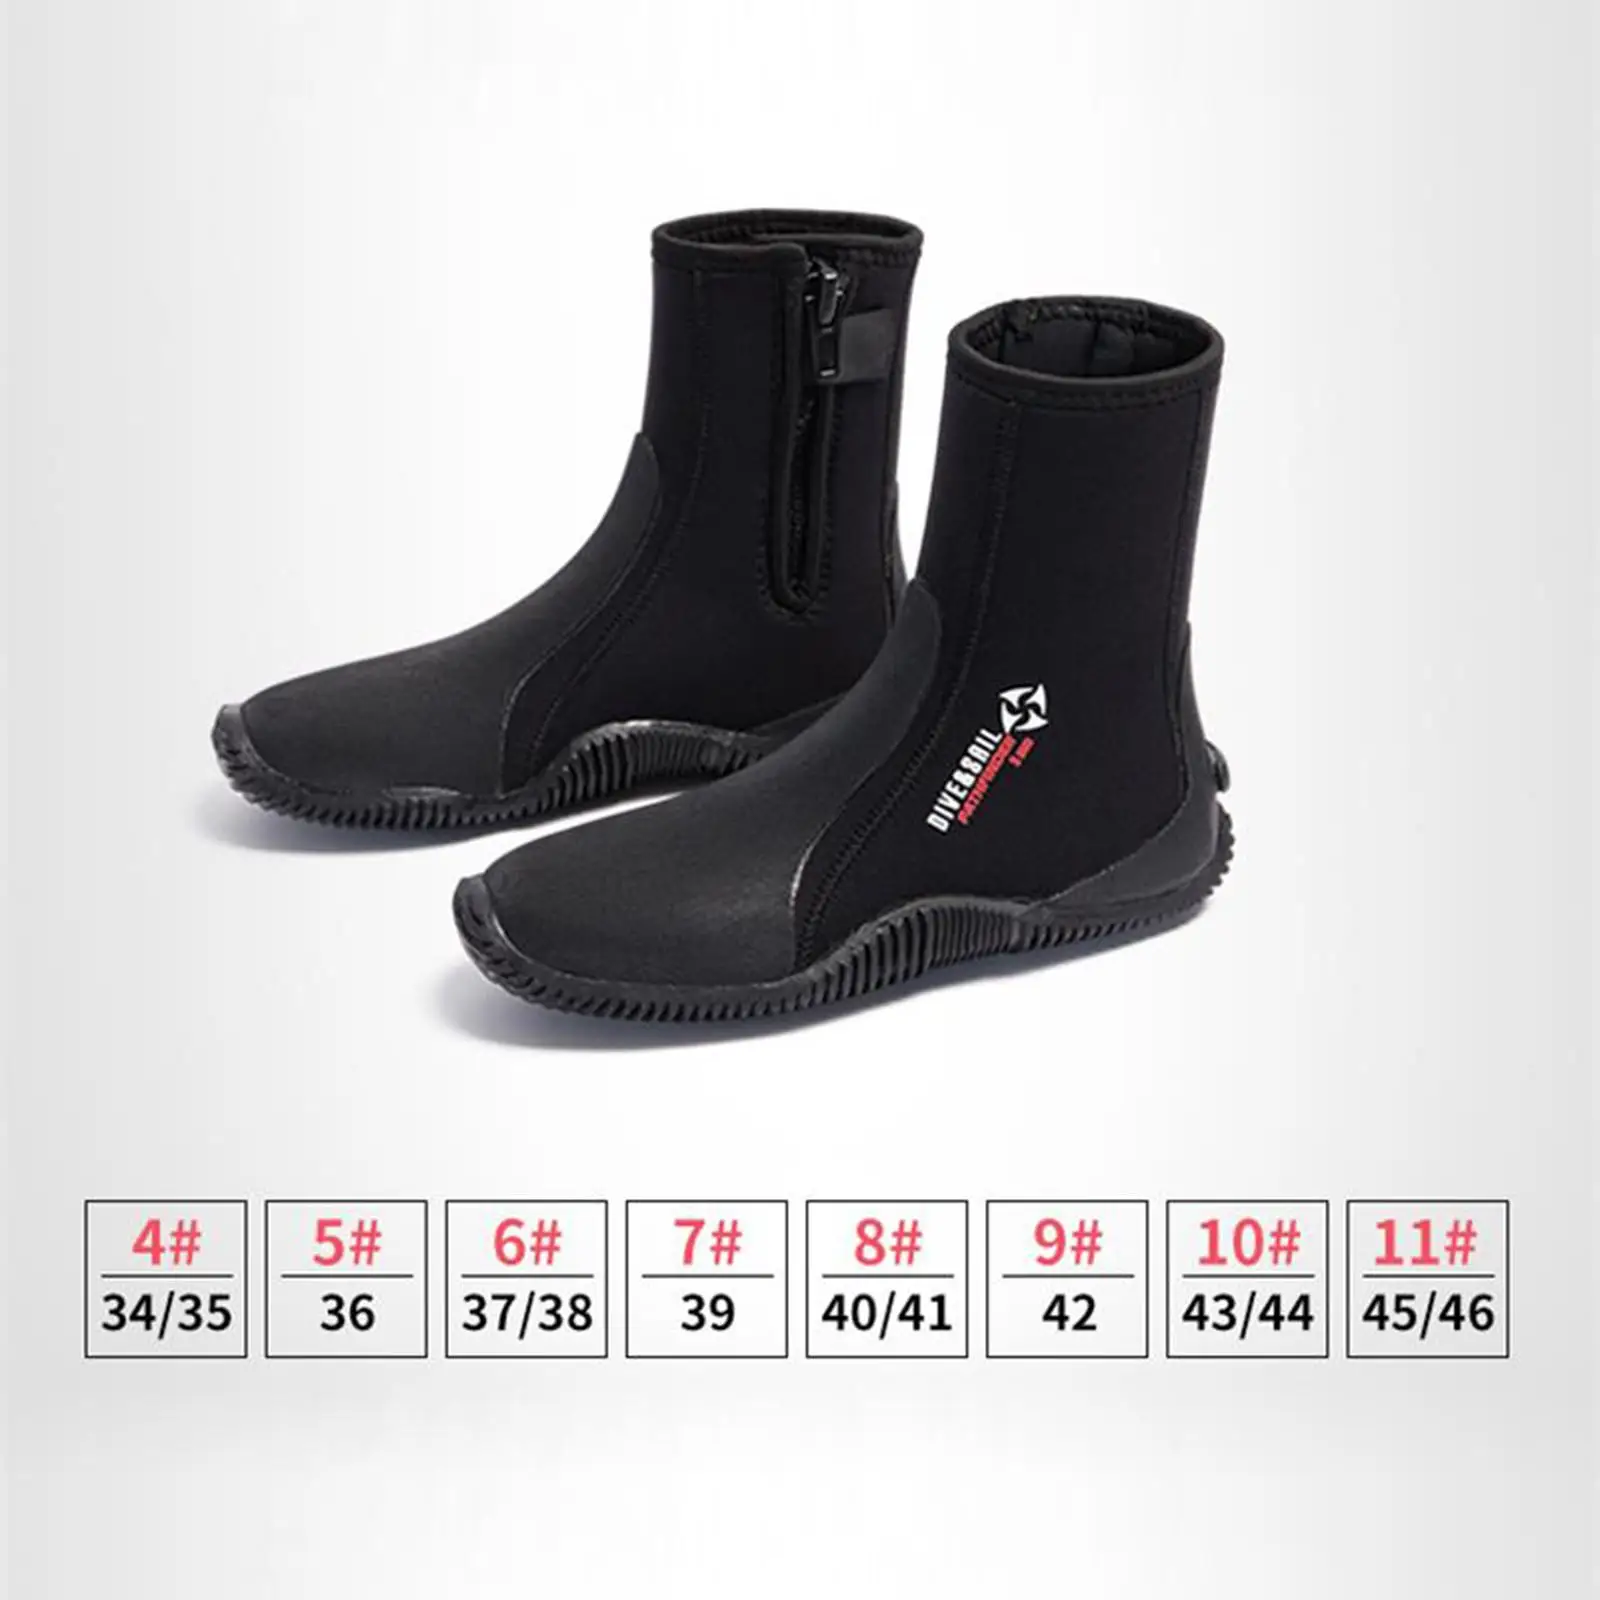 Professional 5mm Neoprene Diving Boots Adults Thermal Winter Wetsuits Boots Beach Water Shoes for Unterwater Sports Snorkeling